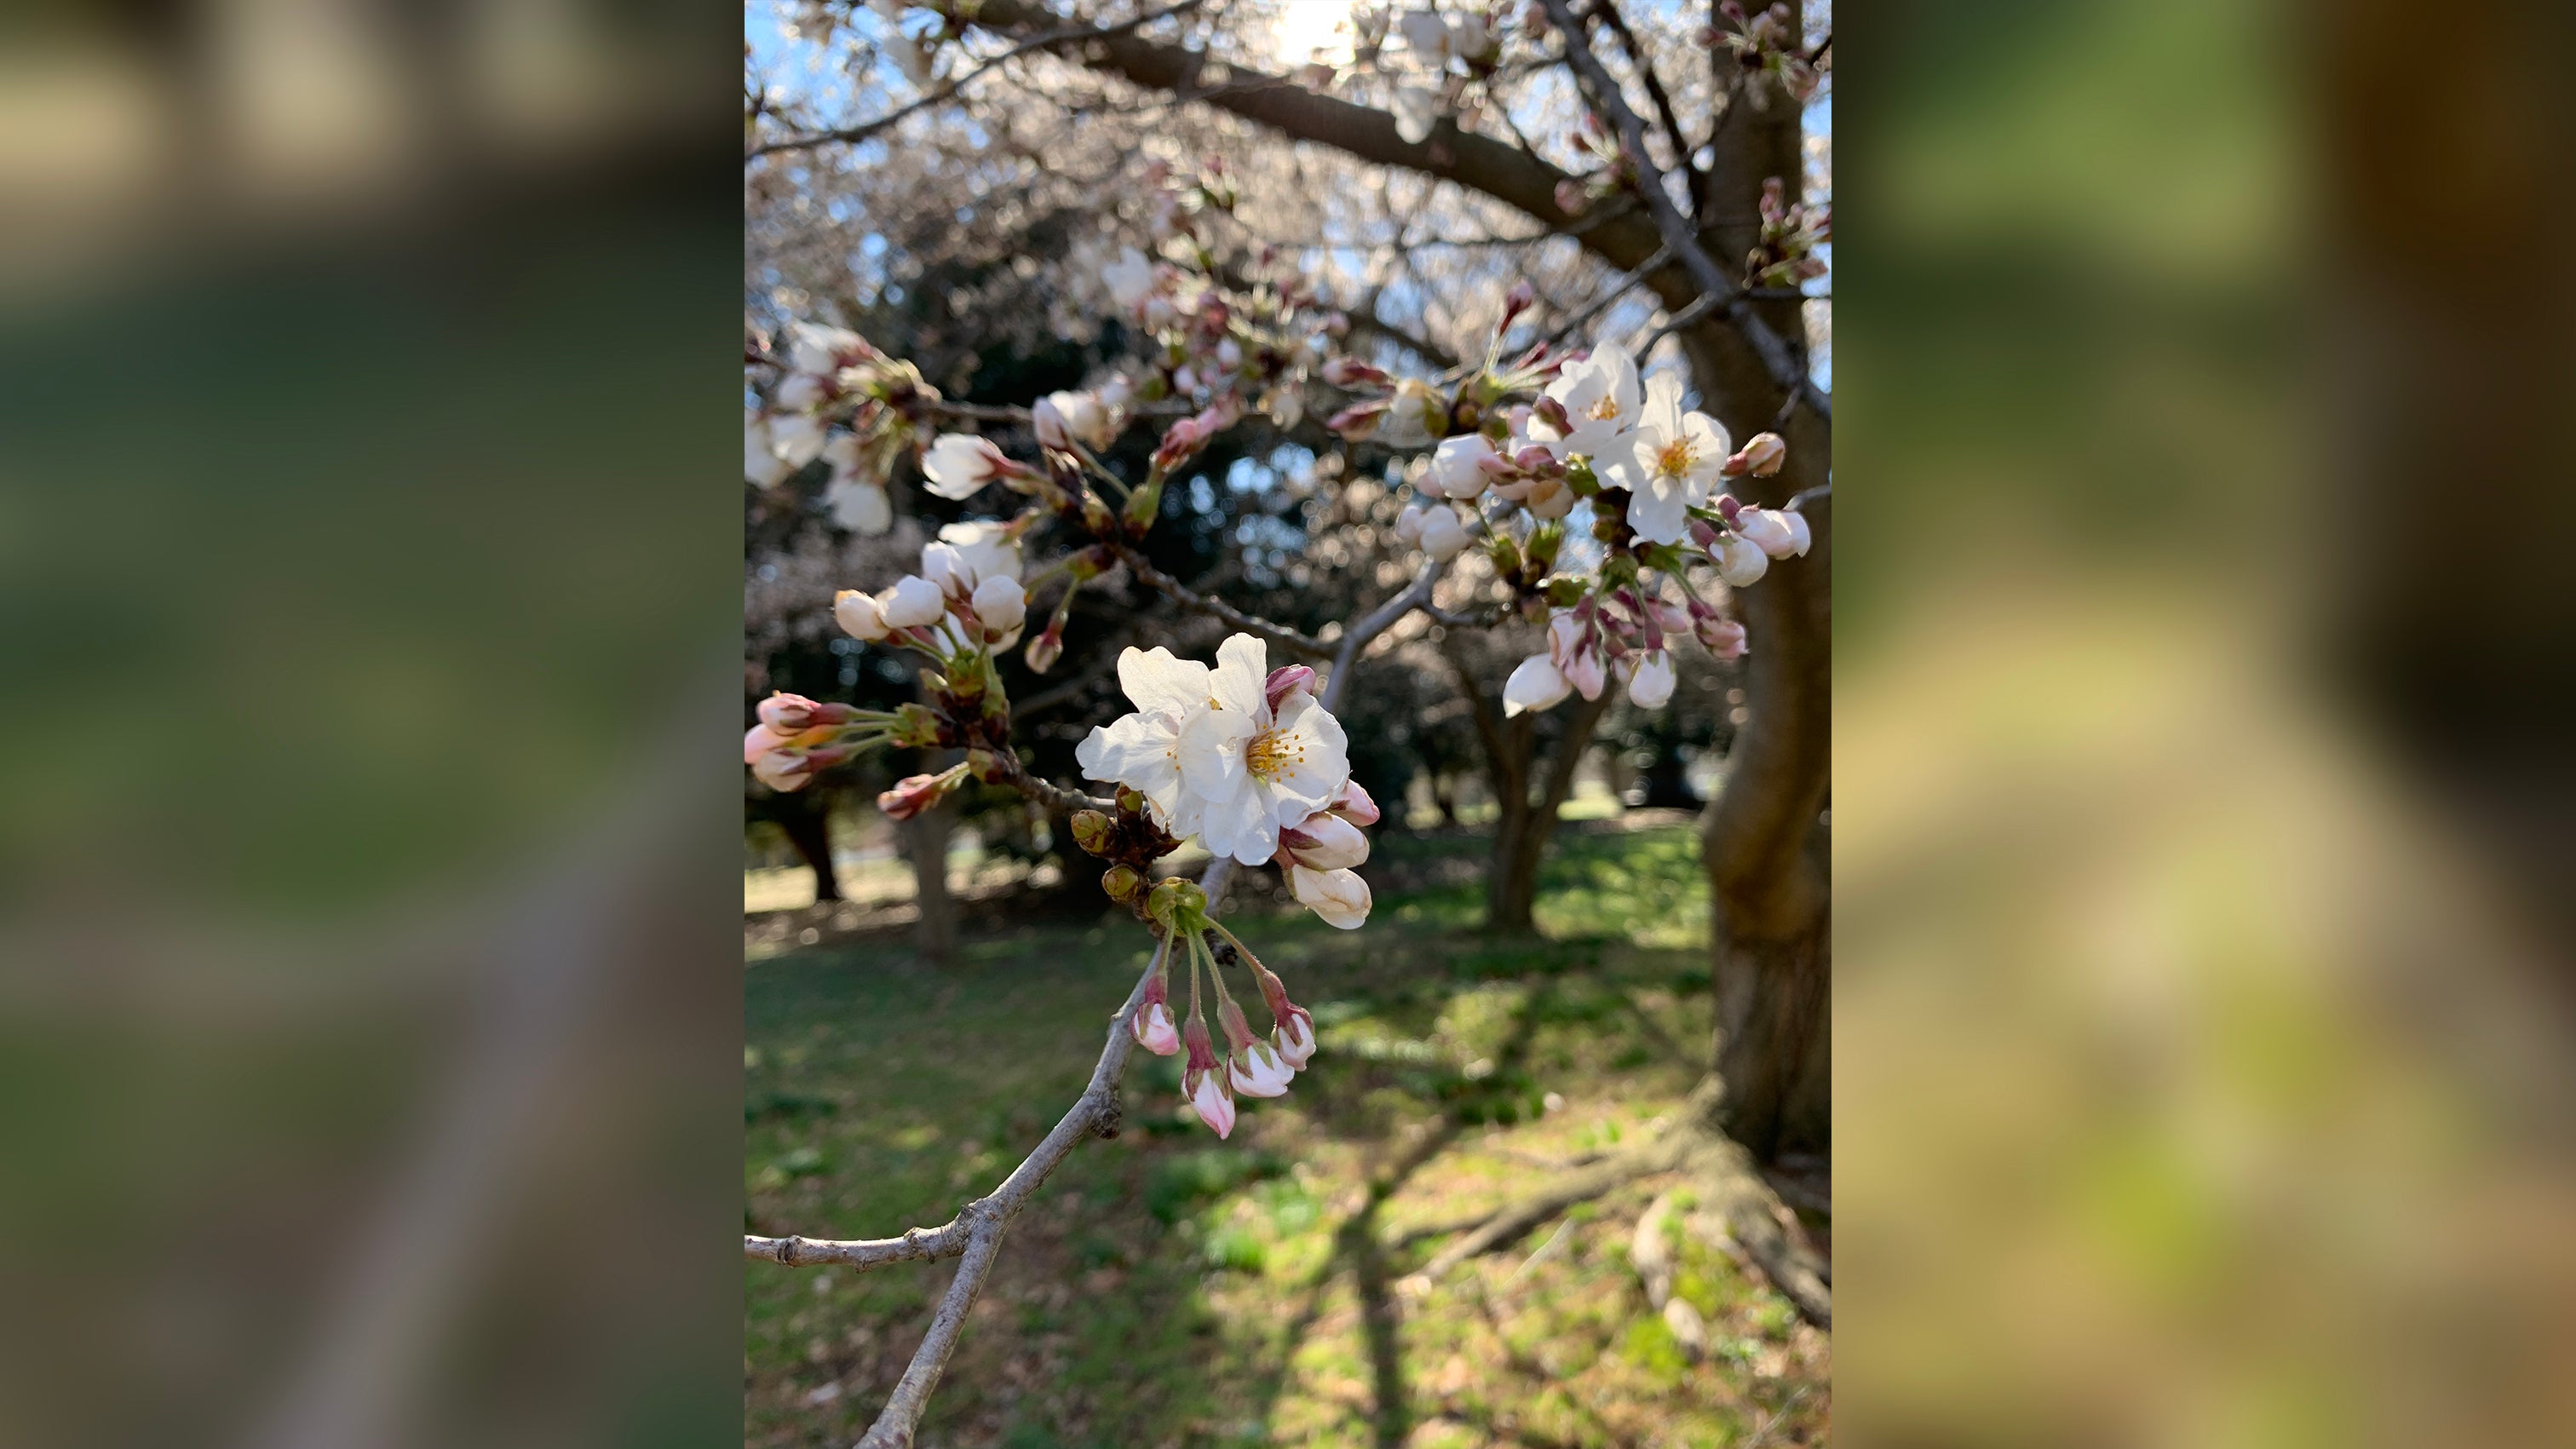 Frost threatens Philly's cherry blossom 'peak bloom' - WHYY